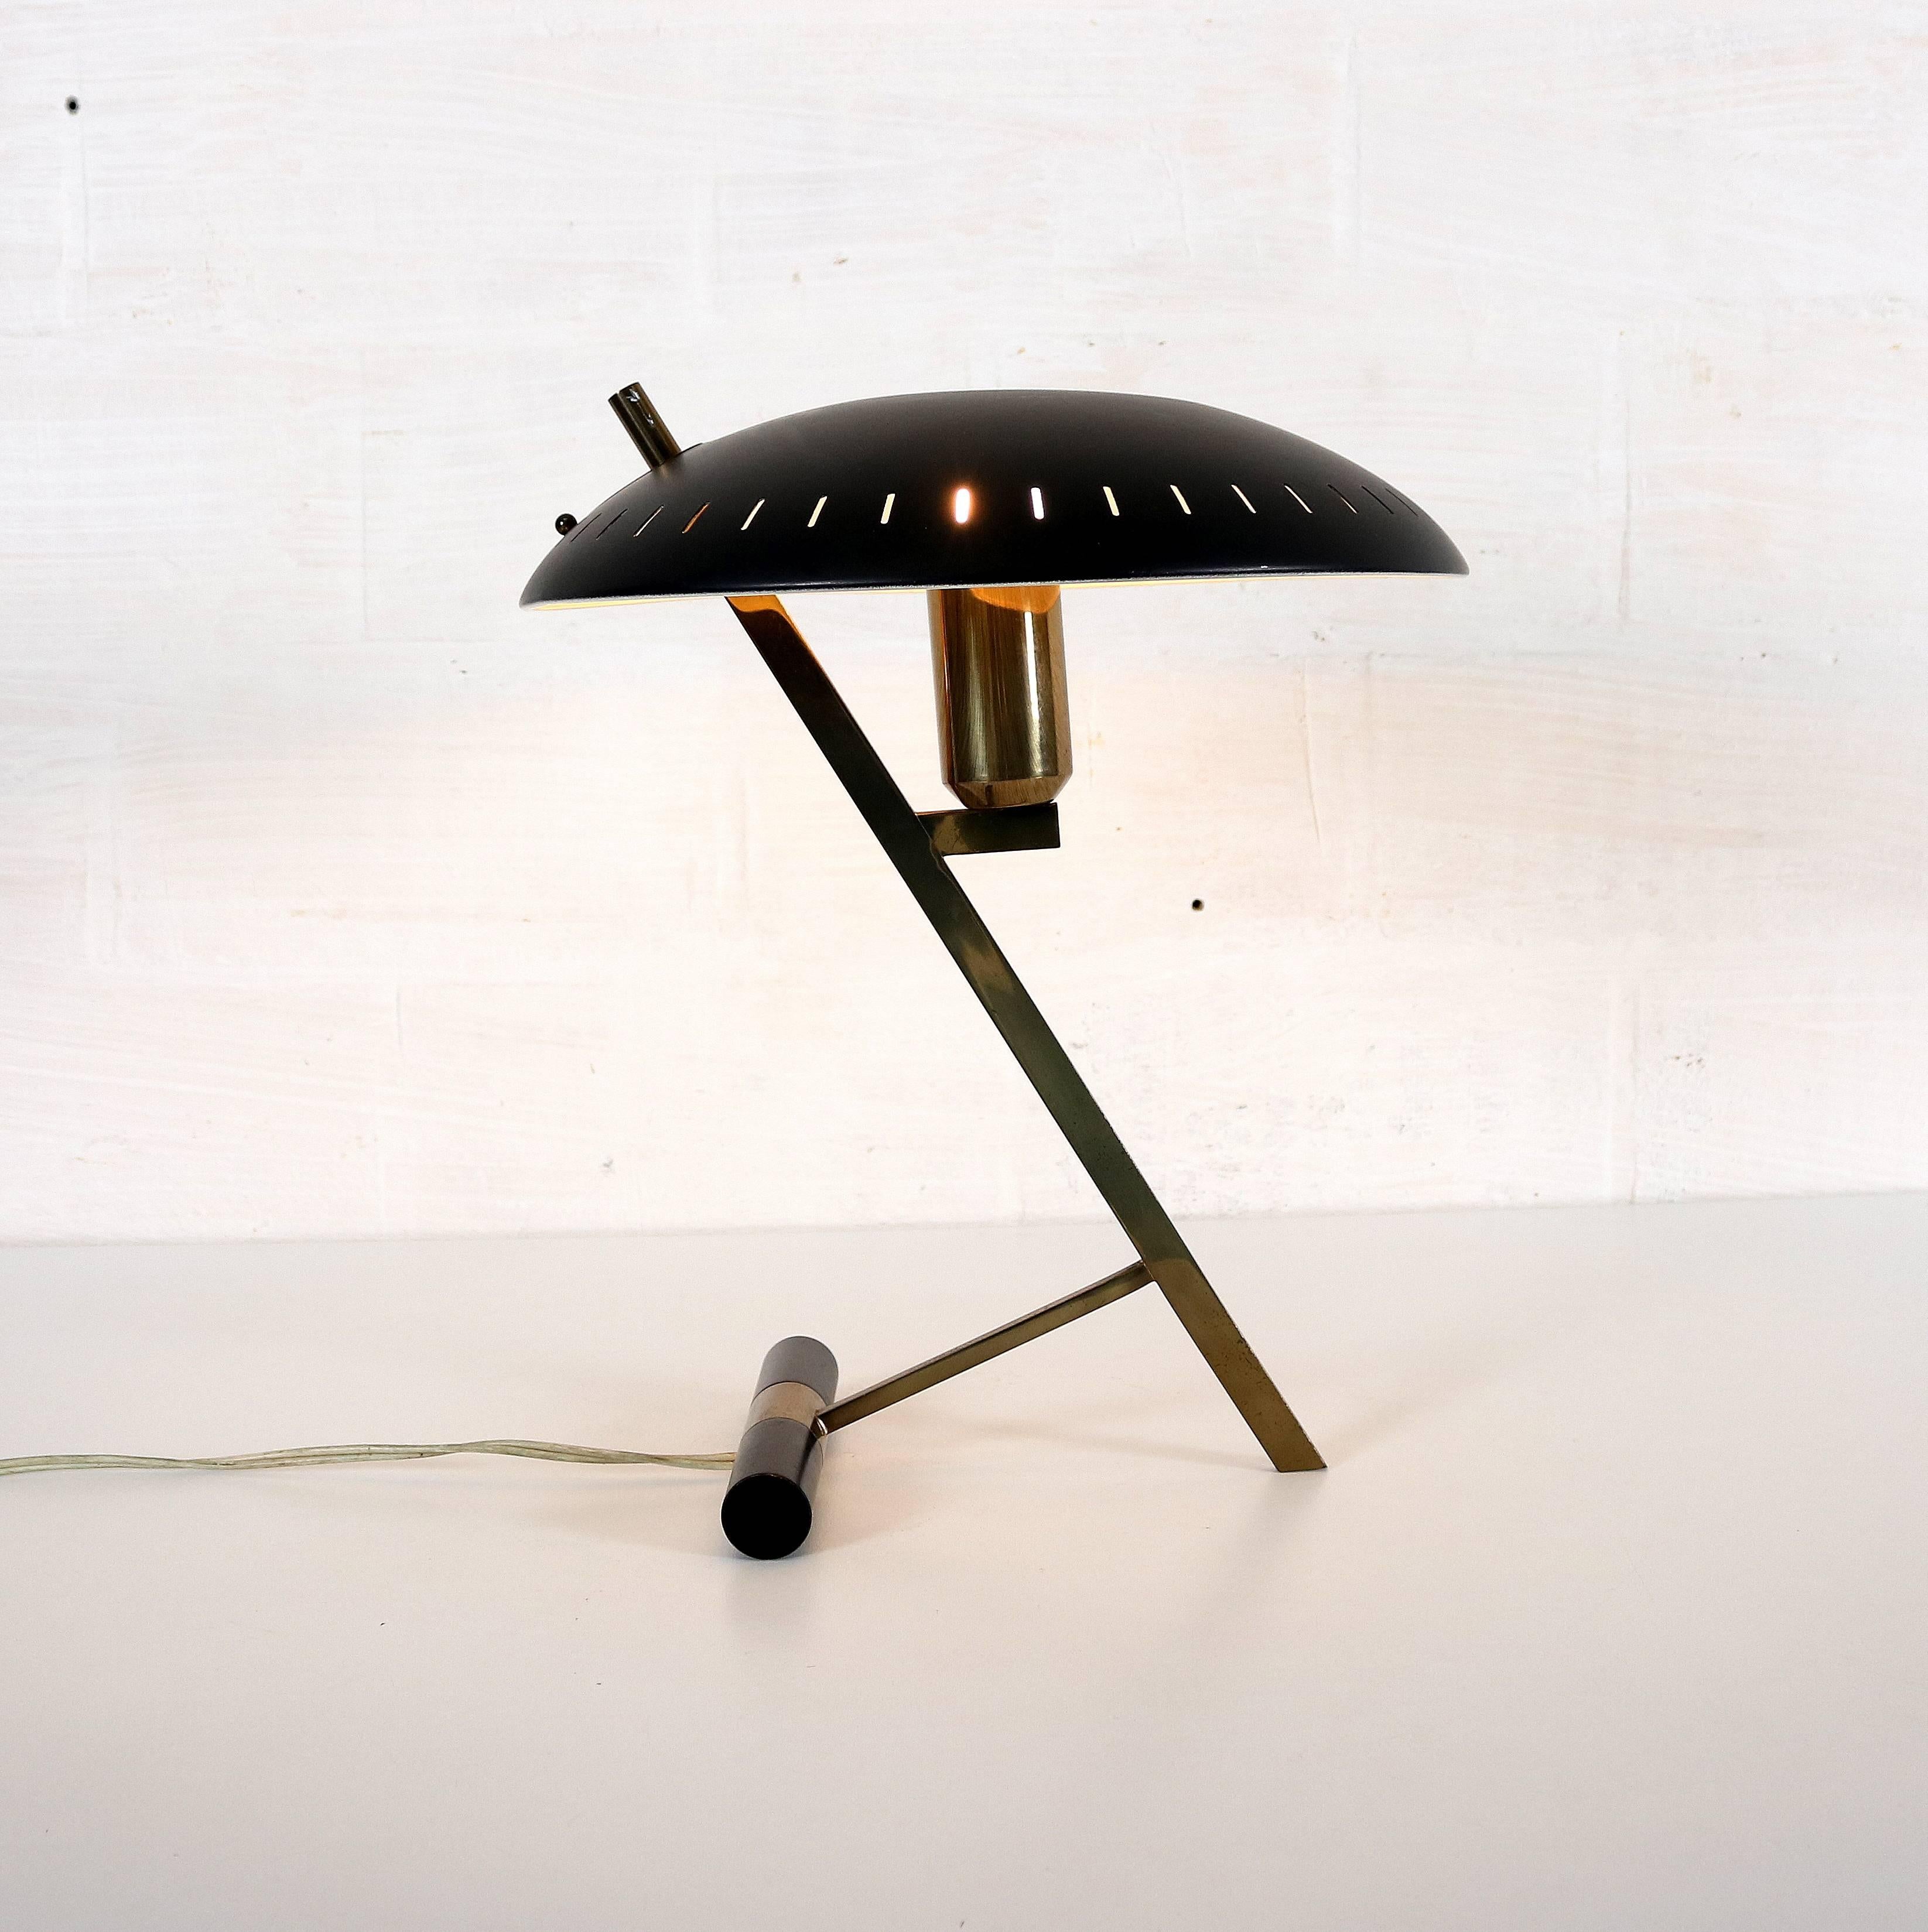 Desk lamp by designer Louis Kalff for Philips.
With brass base and black painted metal lampshade.
In a good vintage condition.